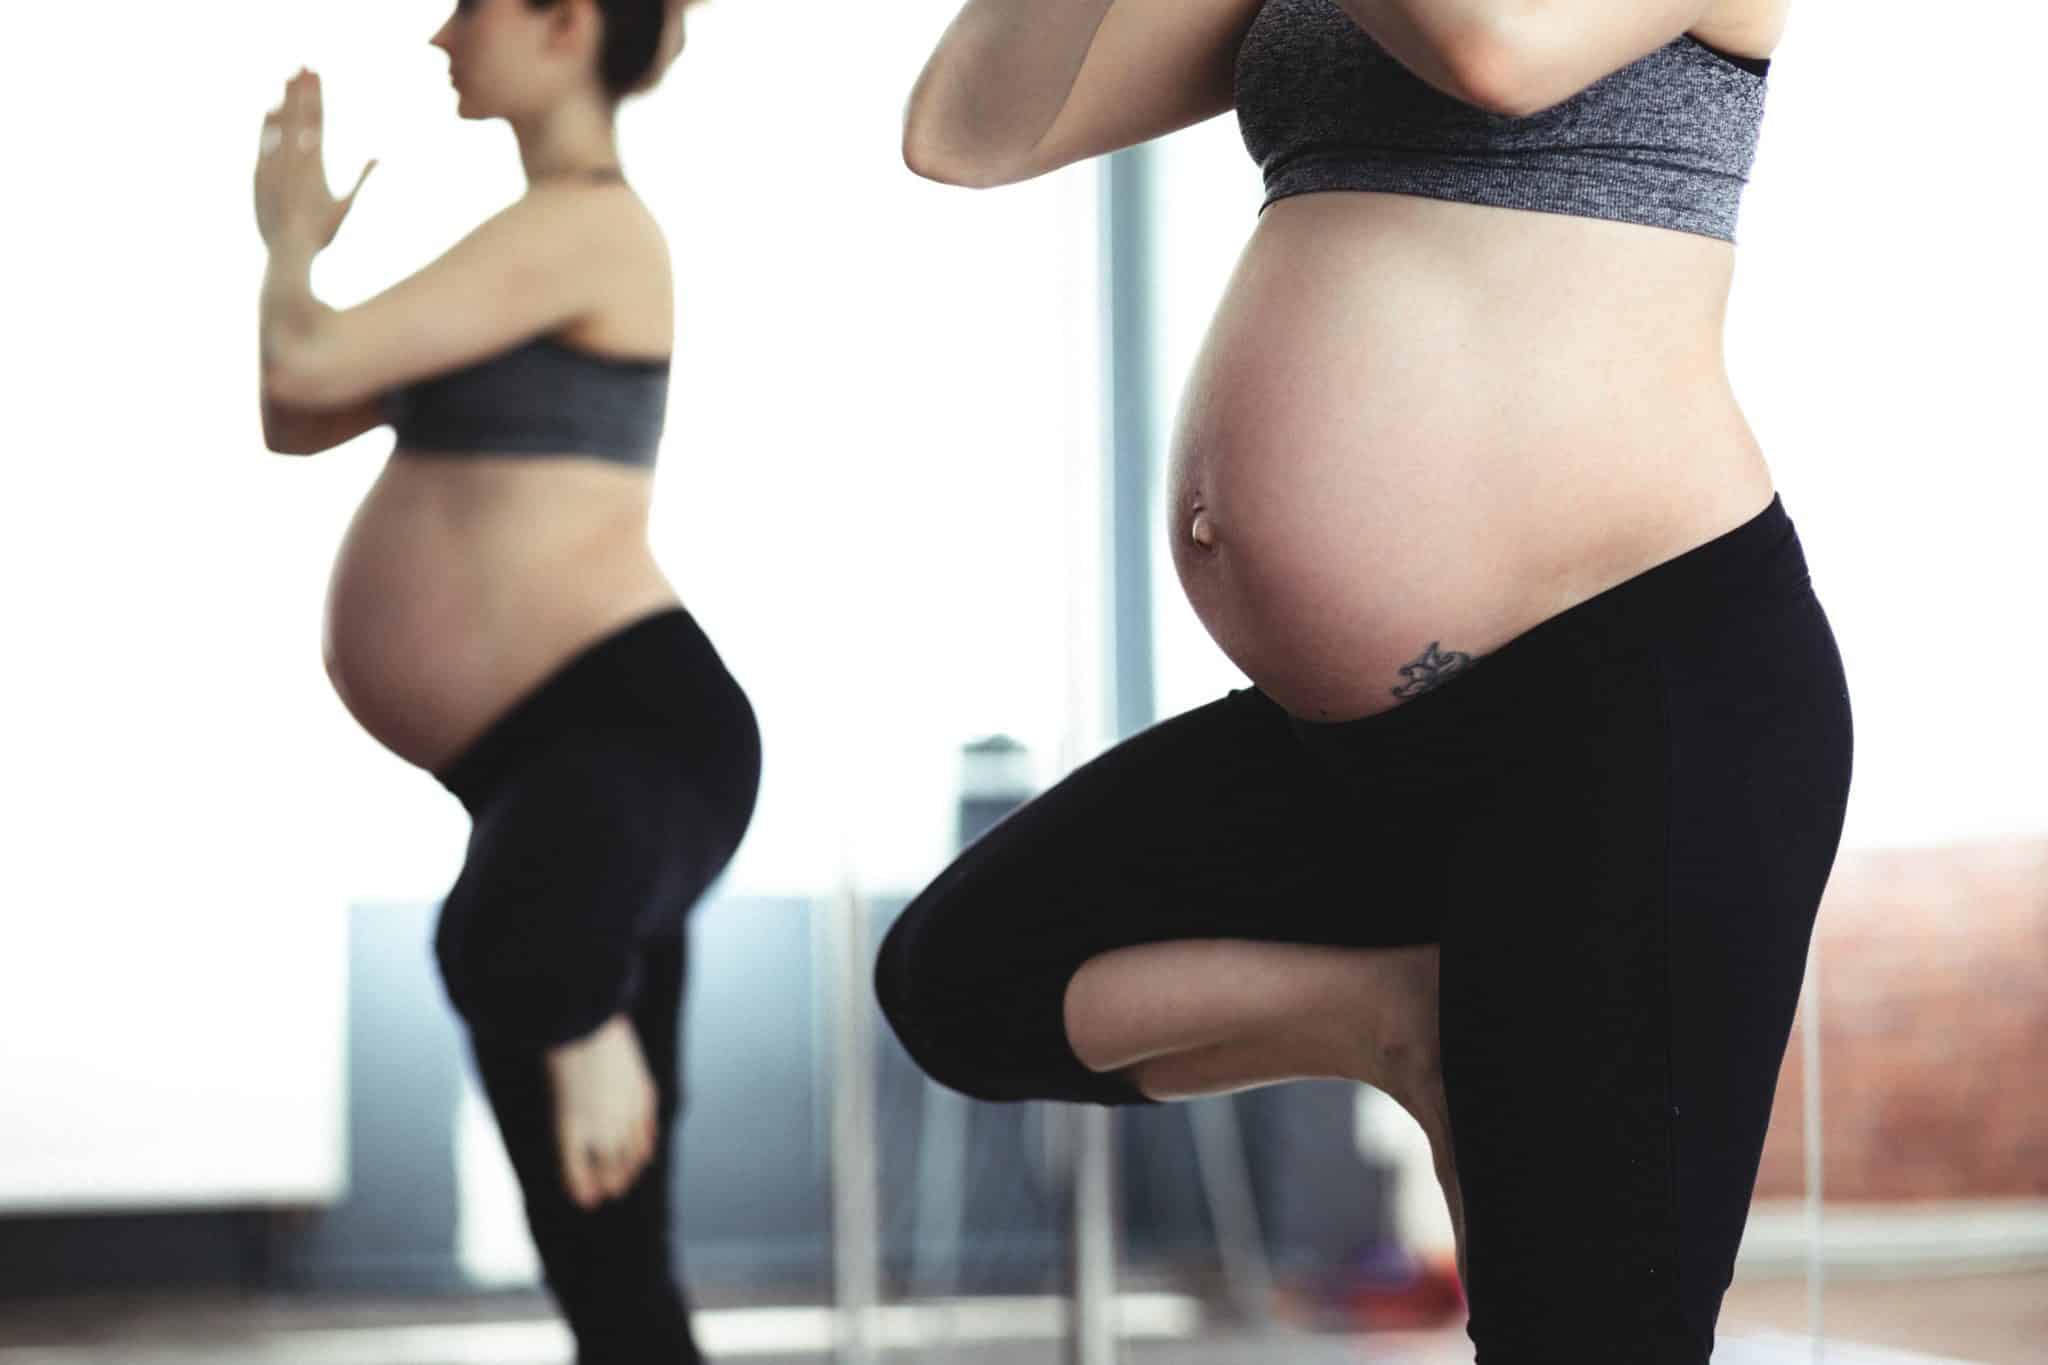 Ten pregnant women are needed for a study testing exercise as a possible treatment for depression during pregnancy.